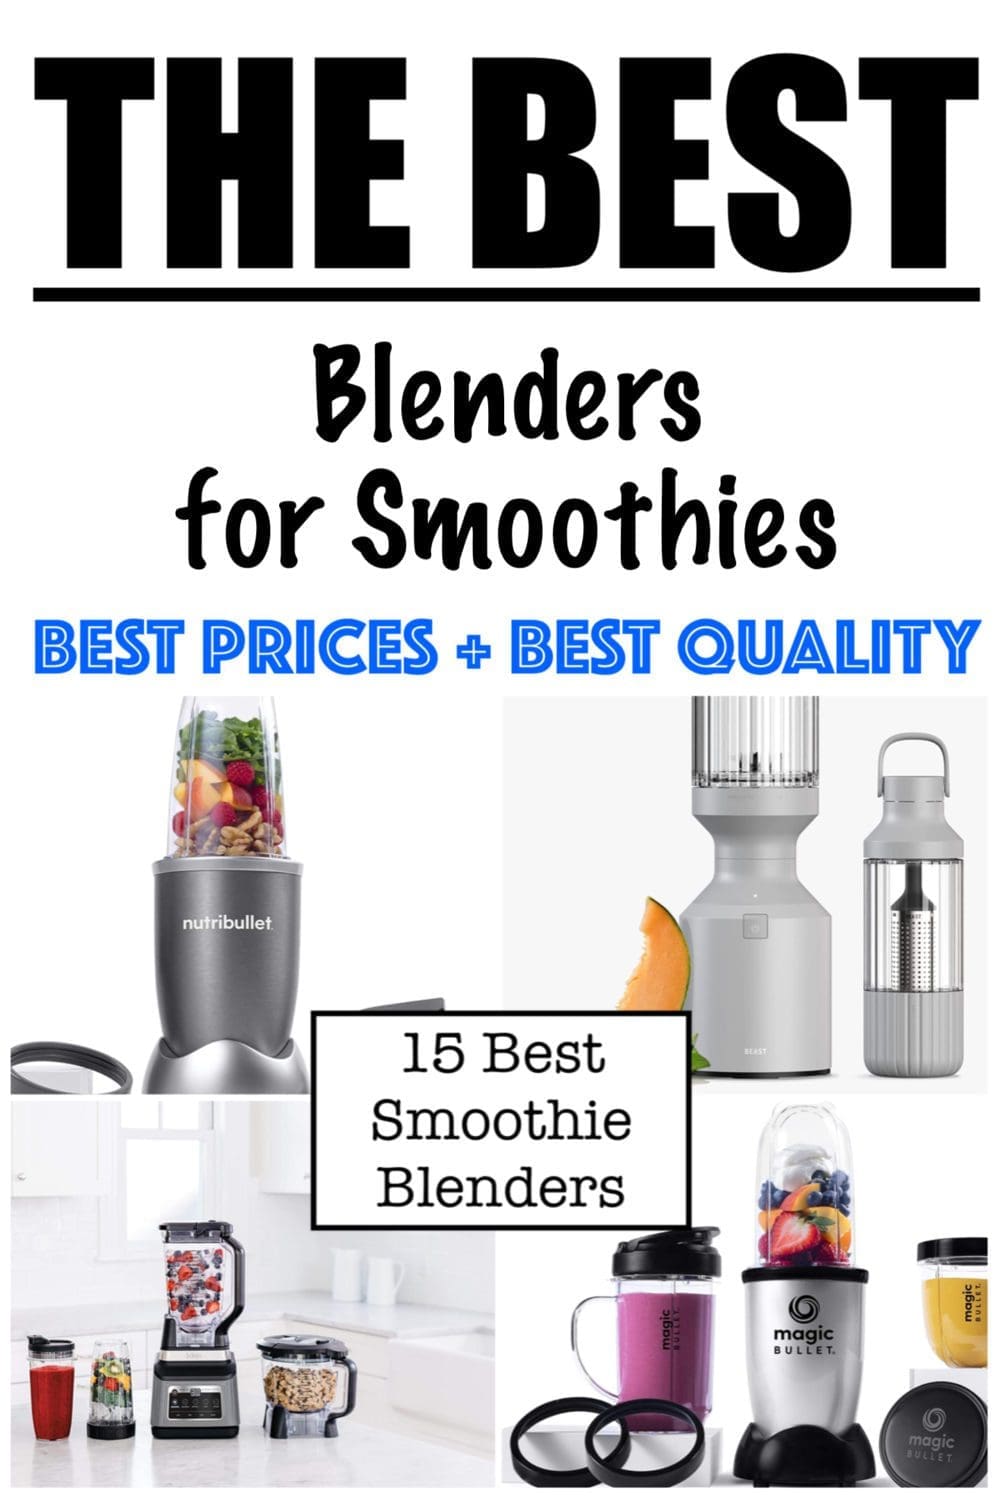 https://loseweightbyeating.com/wp-content/uploads/2017/05/blenders-for-smoothies-scaled.jpeg